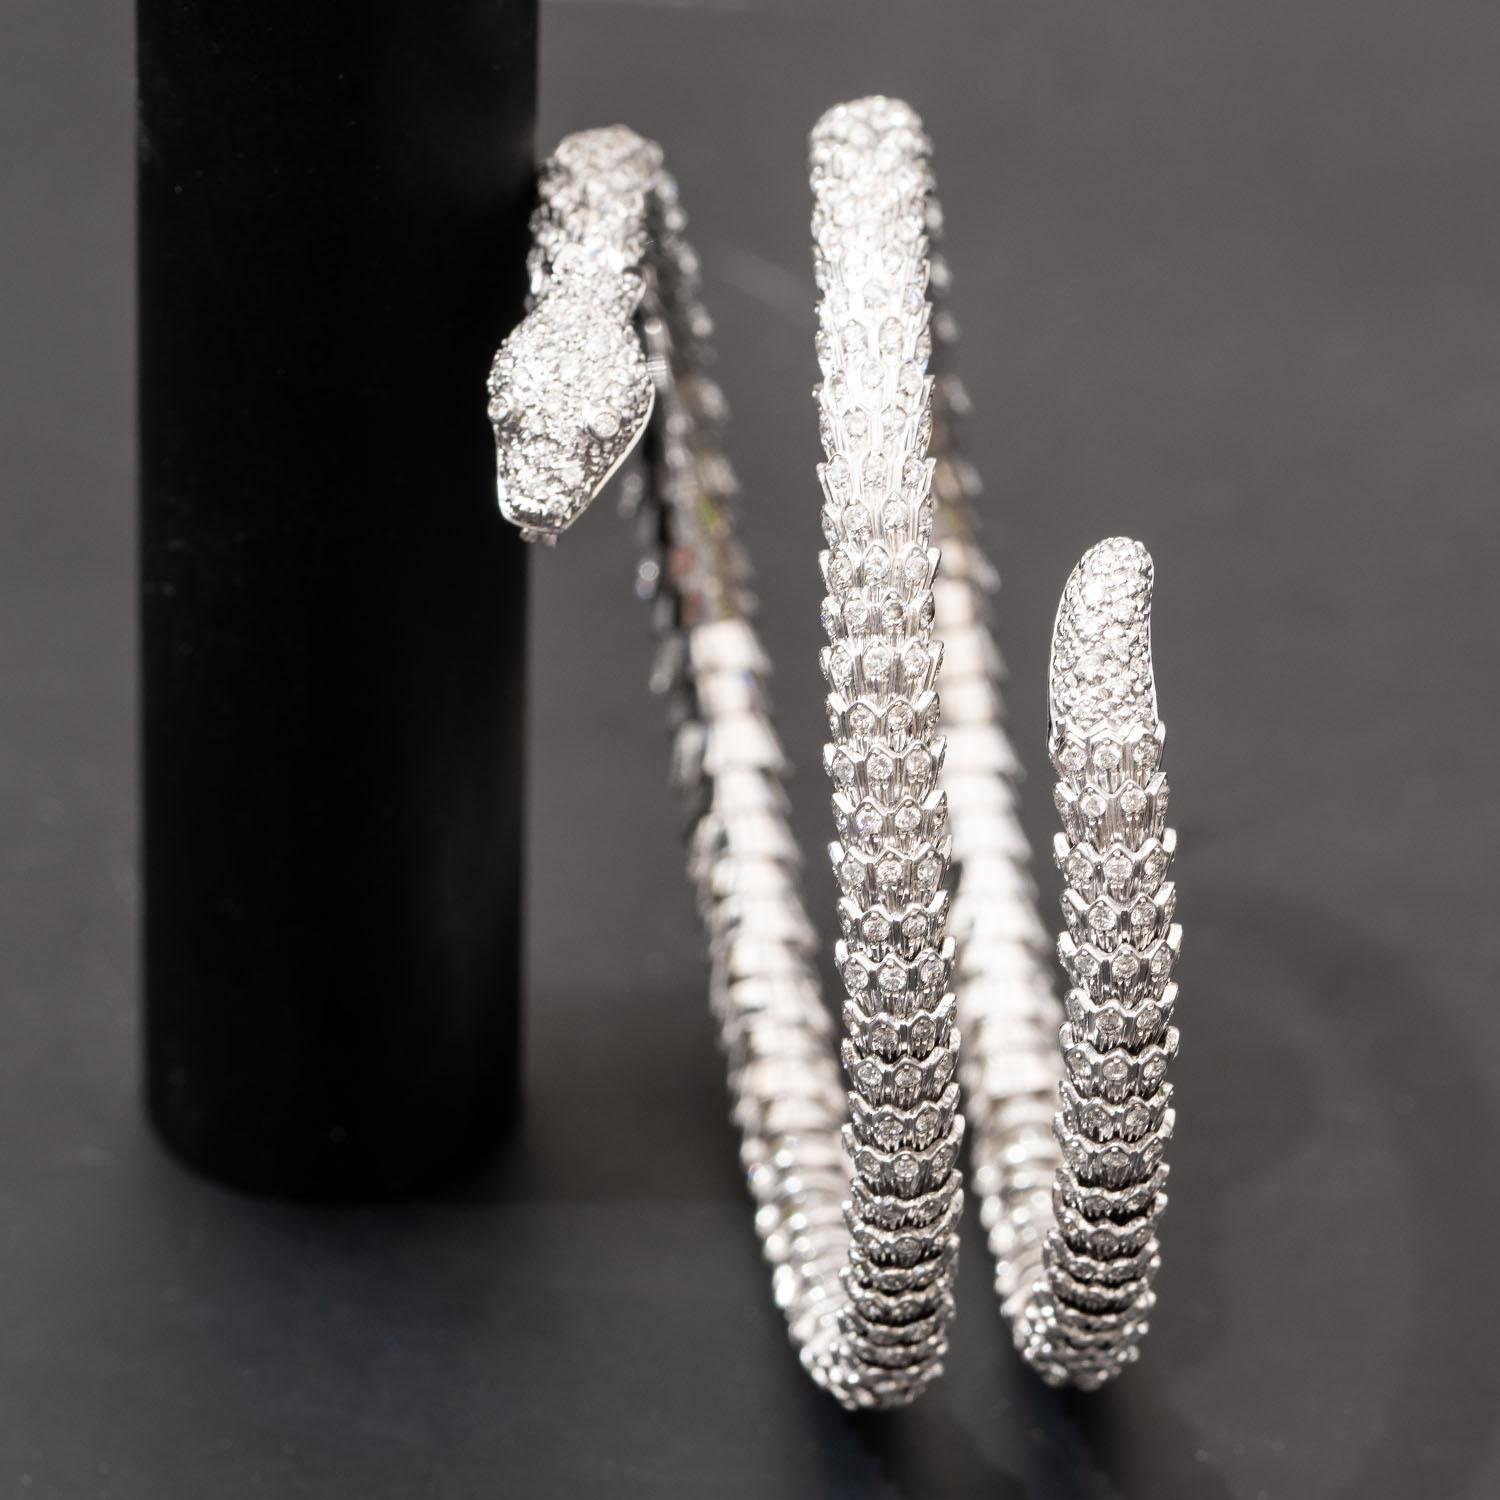 There is an elegance and exotic flavor with every diamond carefully placed on each scale of this magnificent serpent. One of a kind wrap bracelet for a unique kind of woman, Featuring 5.65 carat natural diamonds D VS, 56 gram white gold 18K.

This